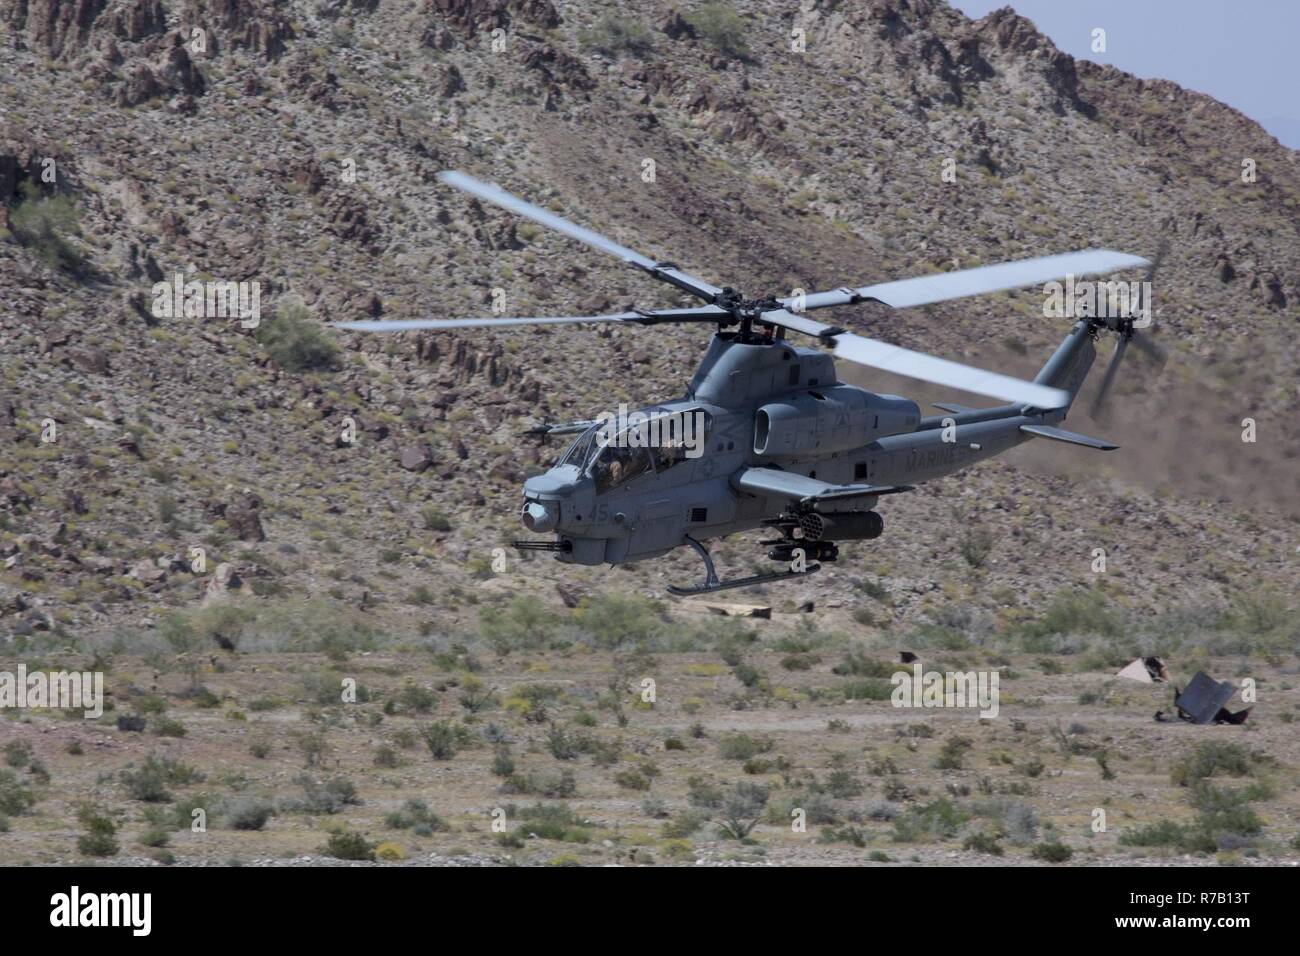 A U.S. Marine Corps AH-1Z Viper assigned to Marine Aviation Weapons and Tactics Squadron One (MAWTS-1) engages targets during offensive air support exercise (OAS) 5 in support of Weapons and Tactics Instructor course (WTI) 2-17 at Chocolate Mountain Aerial Gunnery Range, Ariz., April 11, 2017. OAS is designed to focus on the integration of all air combat element aviation assets with a developed ground scheme of maneuver to conduct close air support. WTI is a seven-week training event hosted by MAWTS-1 cadre, which emphasizes operational integration of the six functions of Marine Corps aviation Stock Photo